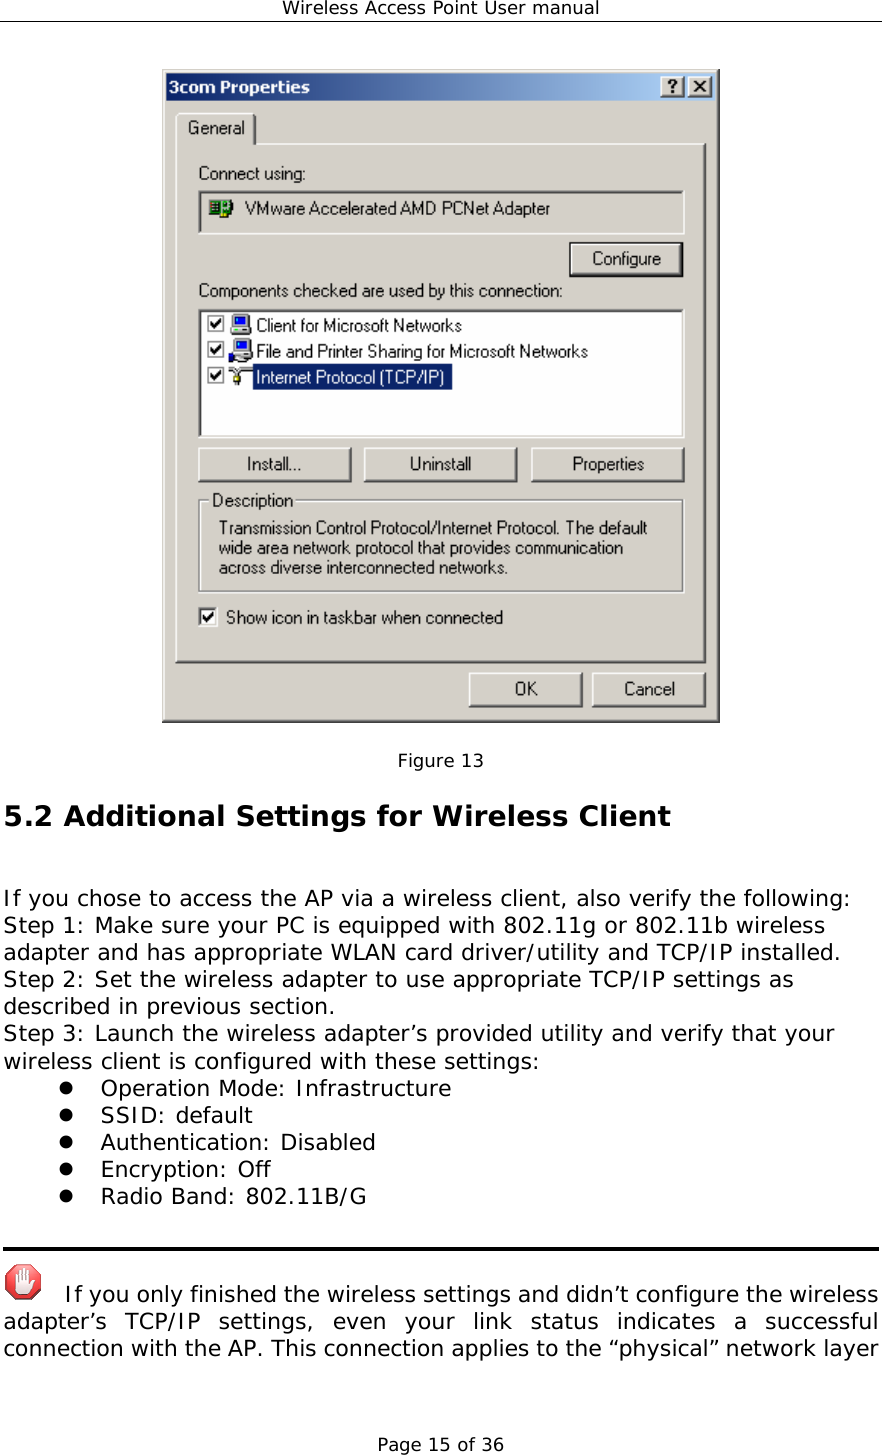 Wireless Access Point User manual Page 15 of 36   Figure 13 5.2 Additional Settings for Wireless Client If you chose to access the AP via a wireless client, also verify the following: Step 1: Make sure your PC is equipped with 802.11g or 802.11b wireless adapter and has appropriate WLAN card driver/utility and TCP/IP installed. Step 2: Set the wireless adapter to use appropriate TCP/IP settings as described in previous section. Step 3: Launch the wireless adapter’s provided utility and verify that your wireless client is configured with these settings: z Operation Mode: Infrastructure z SSID: default z Authentication: Disabled z Encryption: Off z Radio Band: 802.11B/G      If you only finished the wireless settings and didn’t configure the wireless adapter’s TCP/IP settings, even your link status indicates a successful connection with the AP. This connection applies to the “physical” network layer 